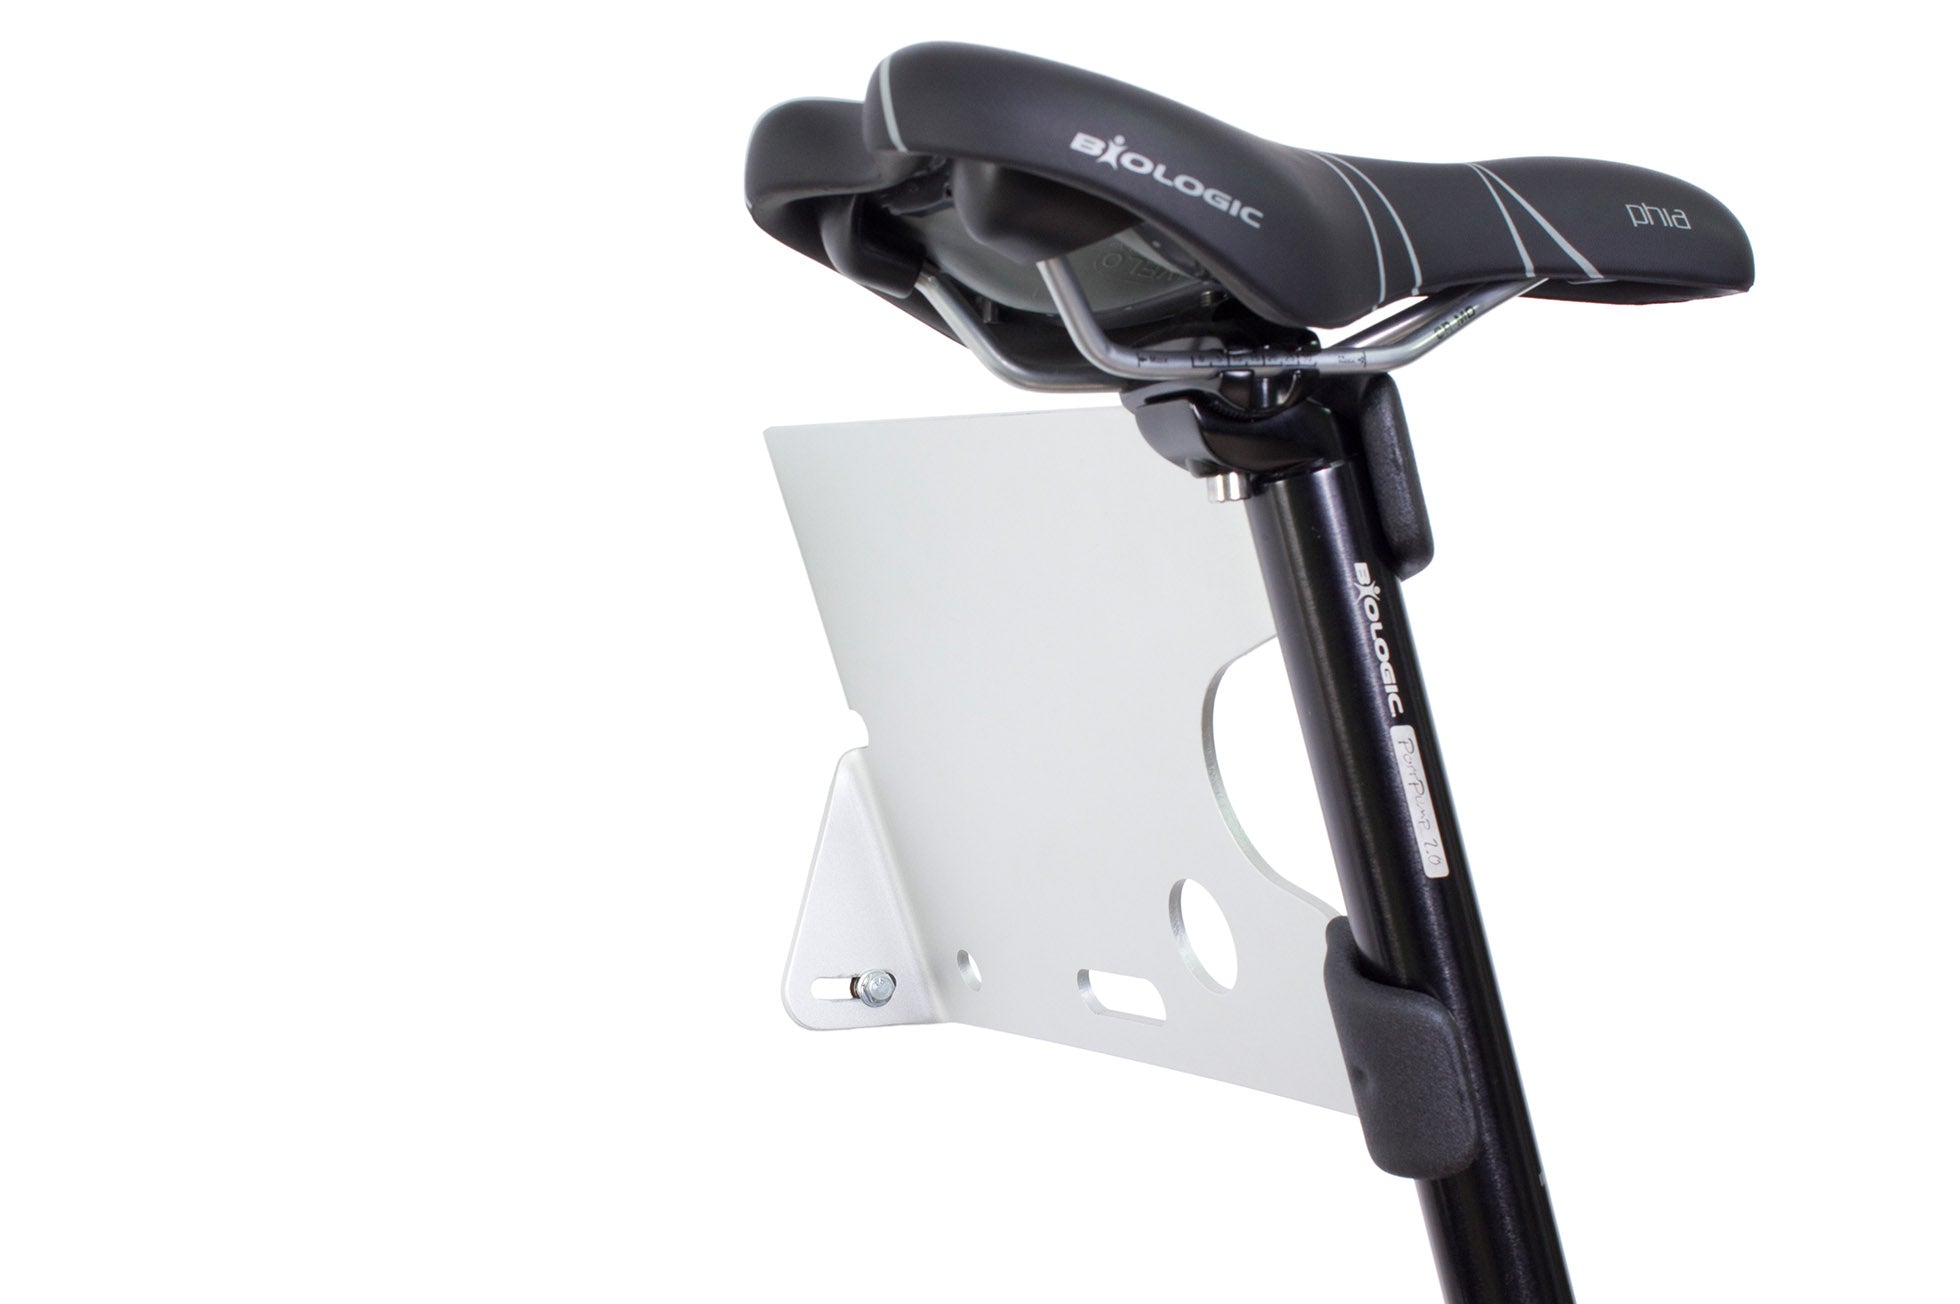 Perch Bicycle Mount